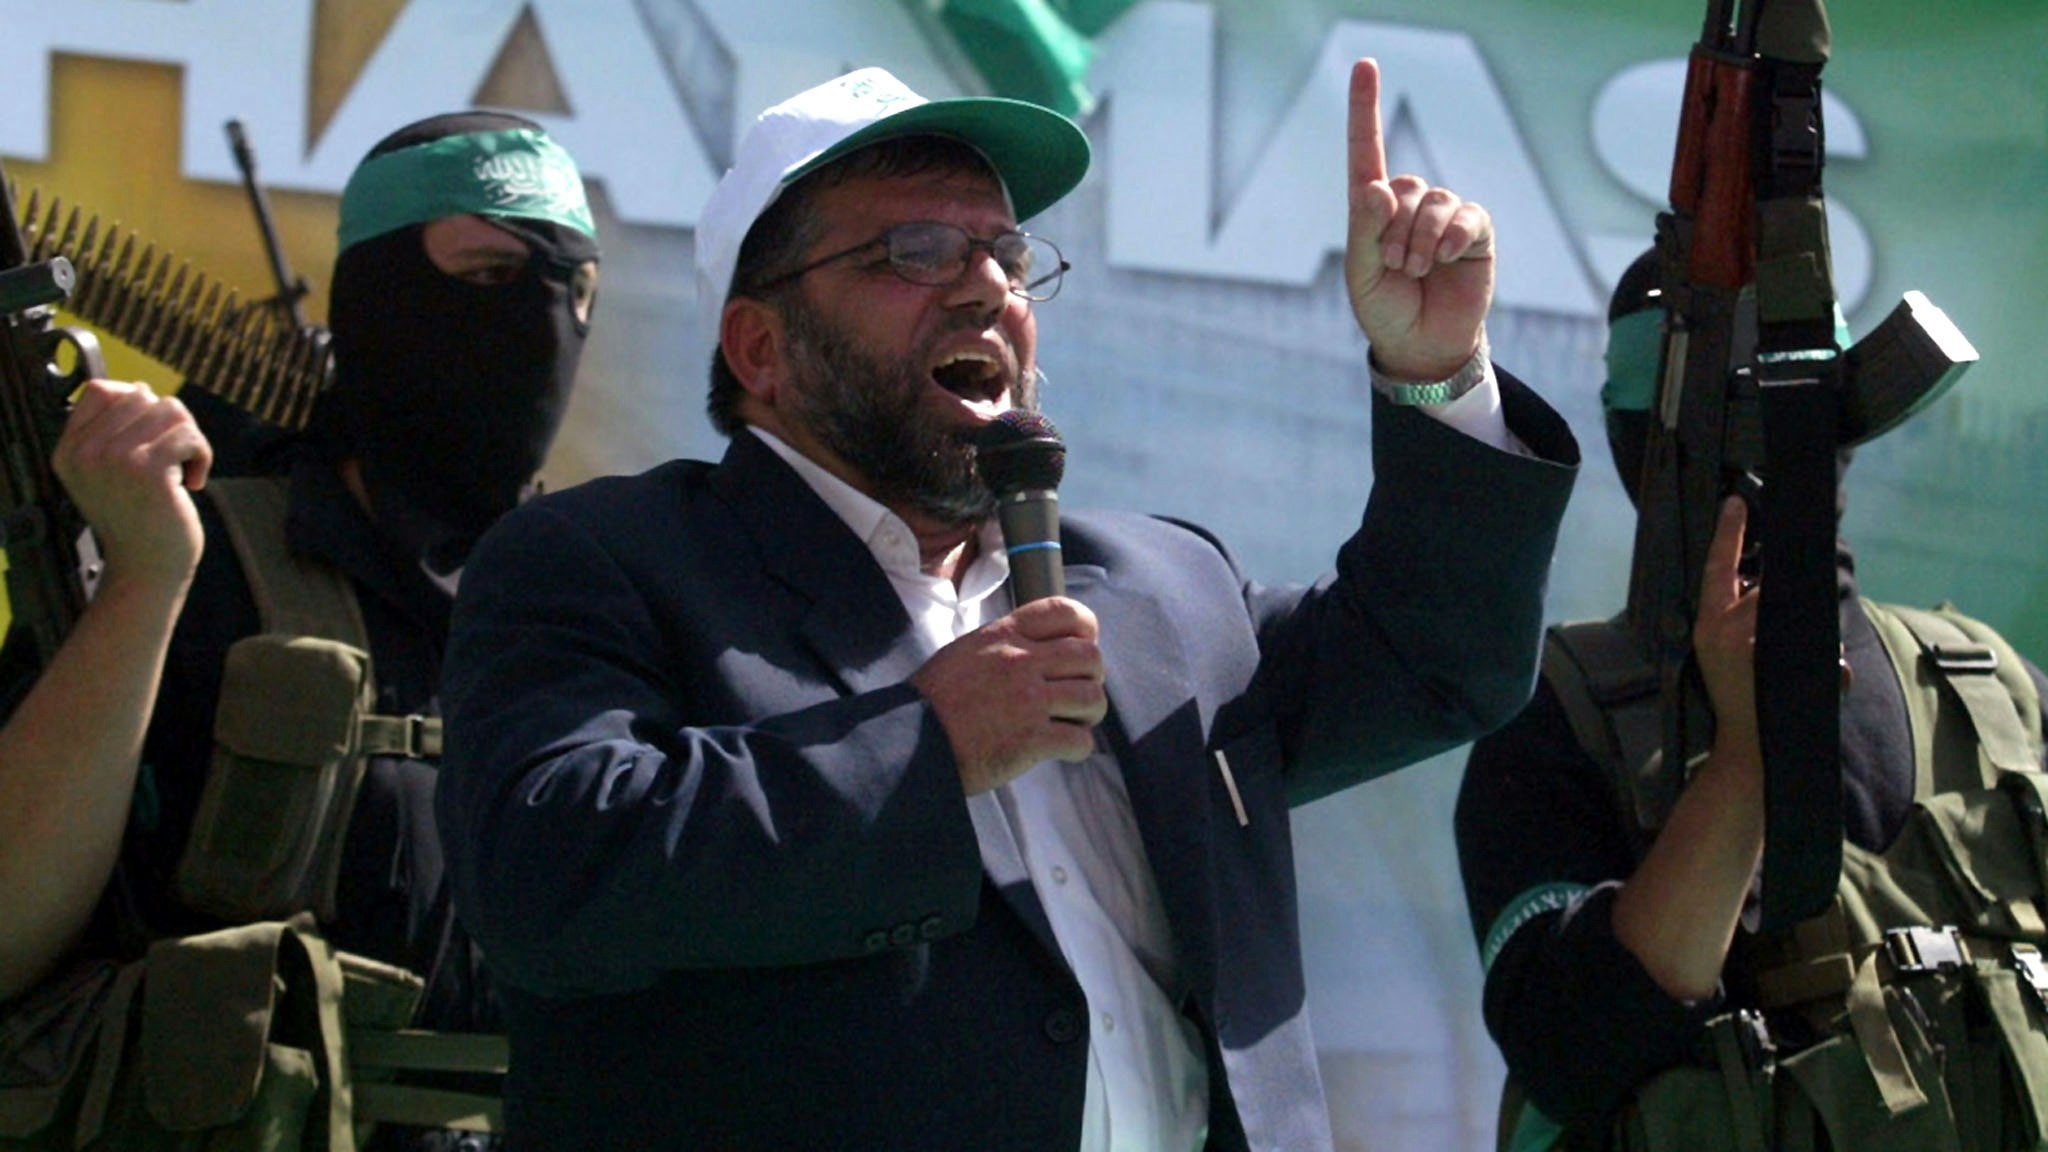 A picture taken in 2006 shows Sheikh Hassan Yousef, a Hamas founder, speaking during a rally for the movement in the West Bank city of Ramallah. An Israeli newspaper reported on February 24, 2006 that Mosab Hassan Yousef, 32, the son of Sheikh Yousef, was a key mole for Israeli intelligence inside the Islamist movement, helping thwart dozens of attacks.